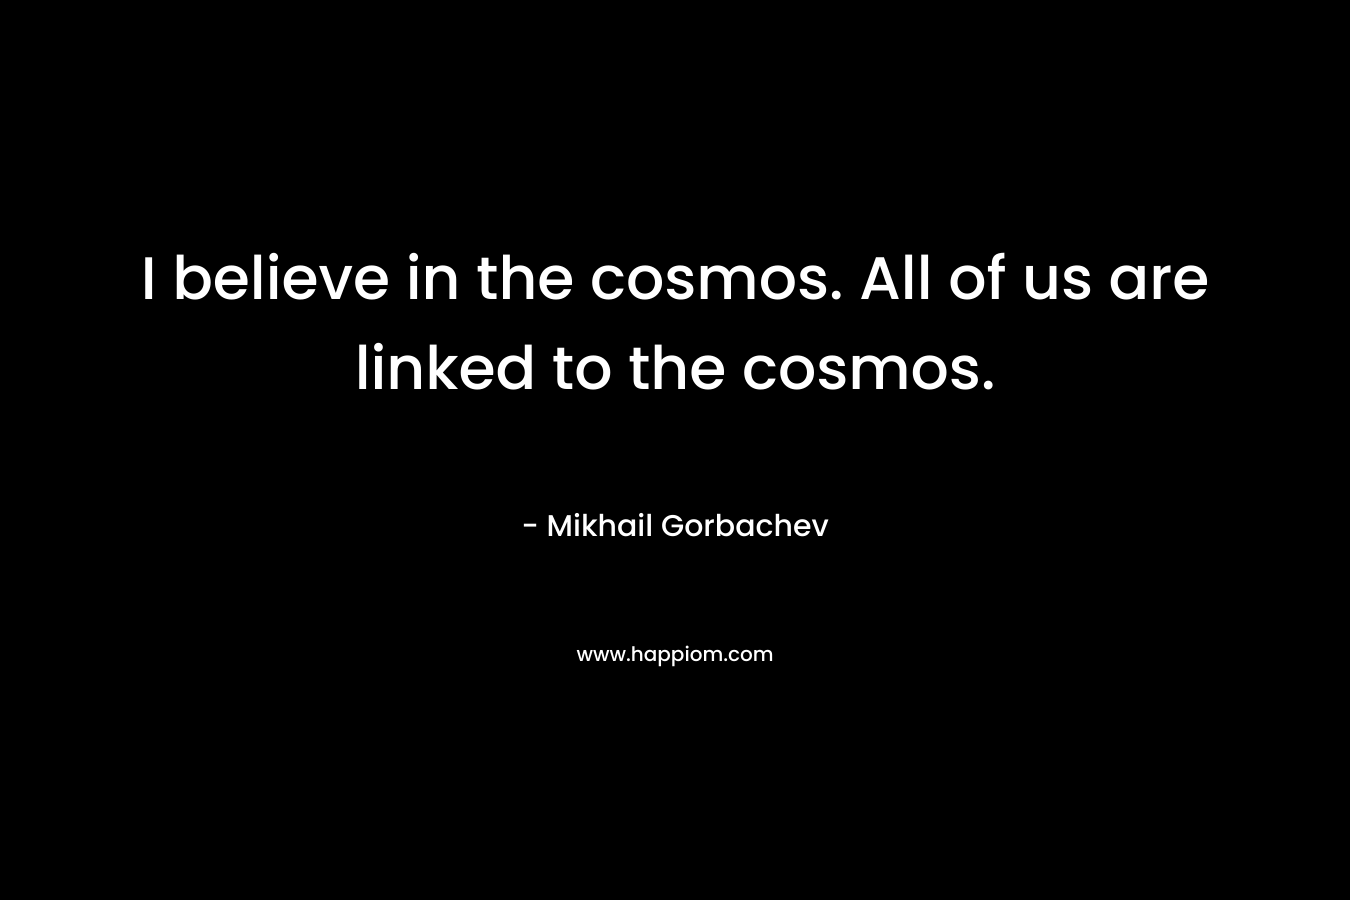 I believe in the cosmos. All of us are linked to the cosmos. – Mikhail Gorbachev